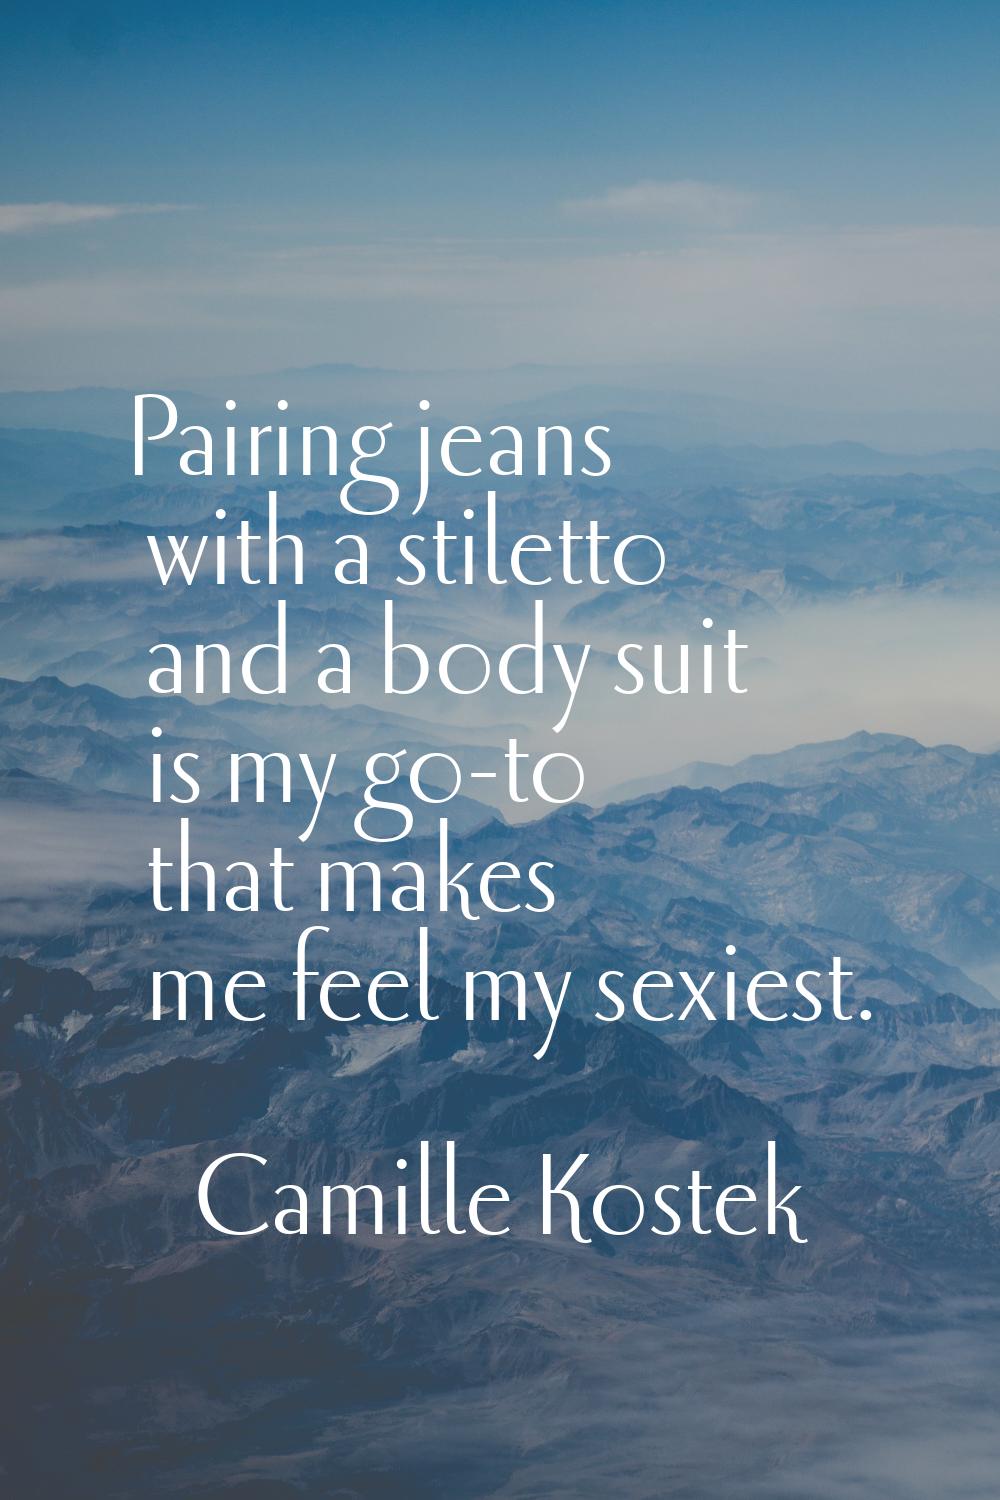 Pairing jeans with a stiletto and a body suit is my go-to that makes me feel my sexiest.